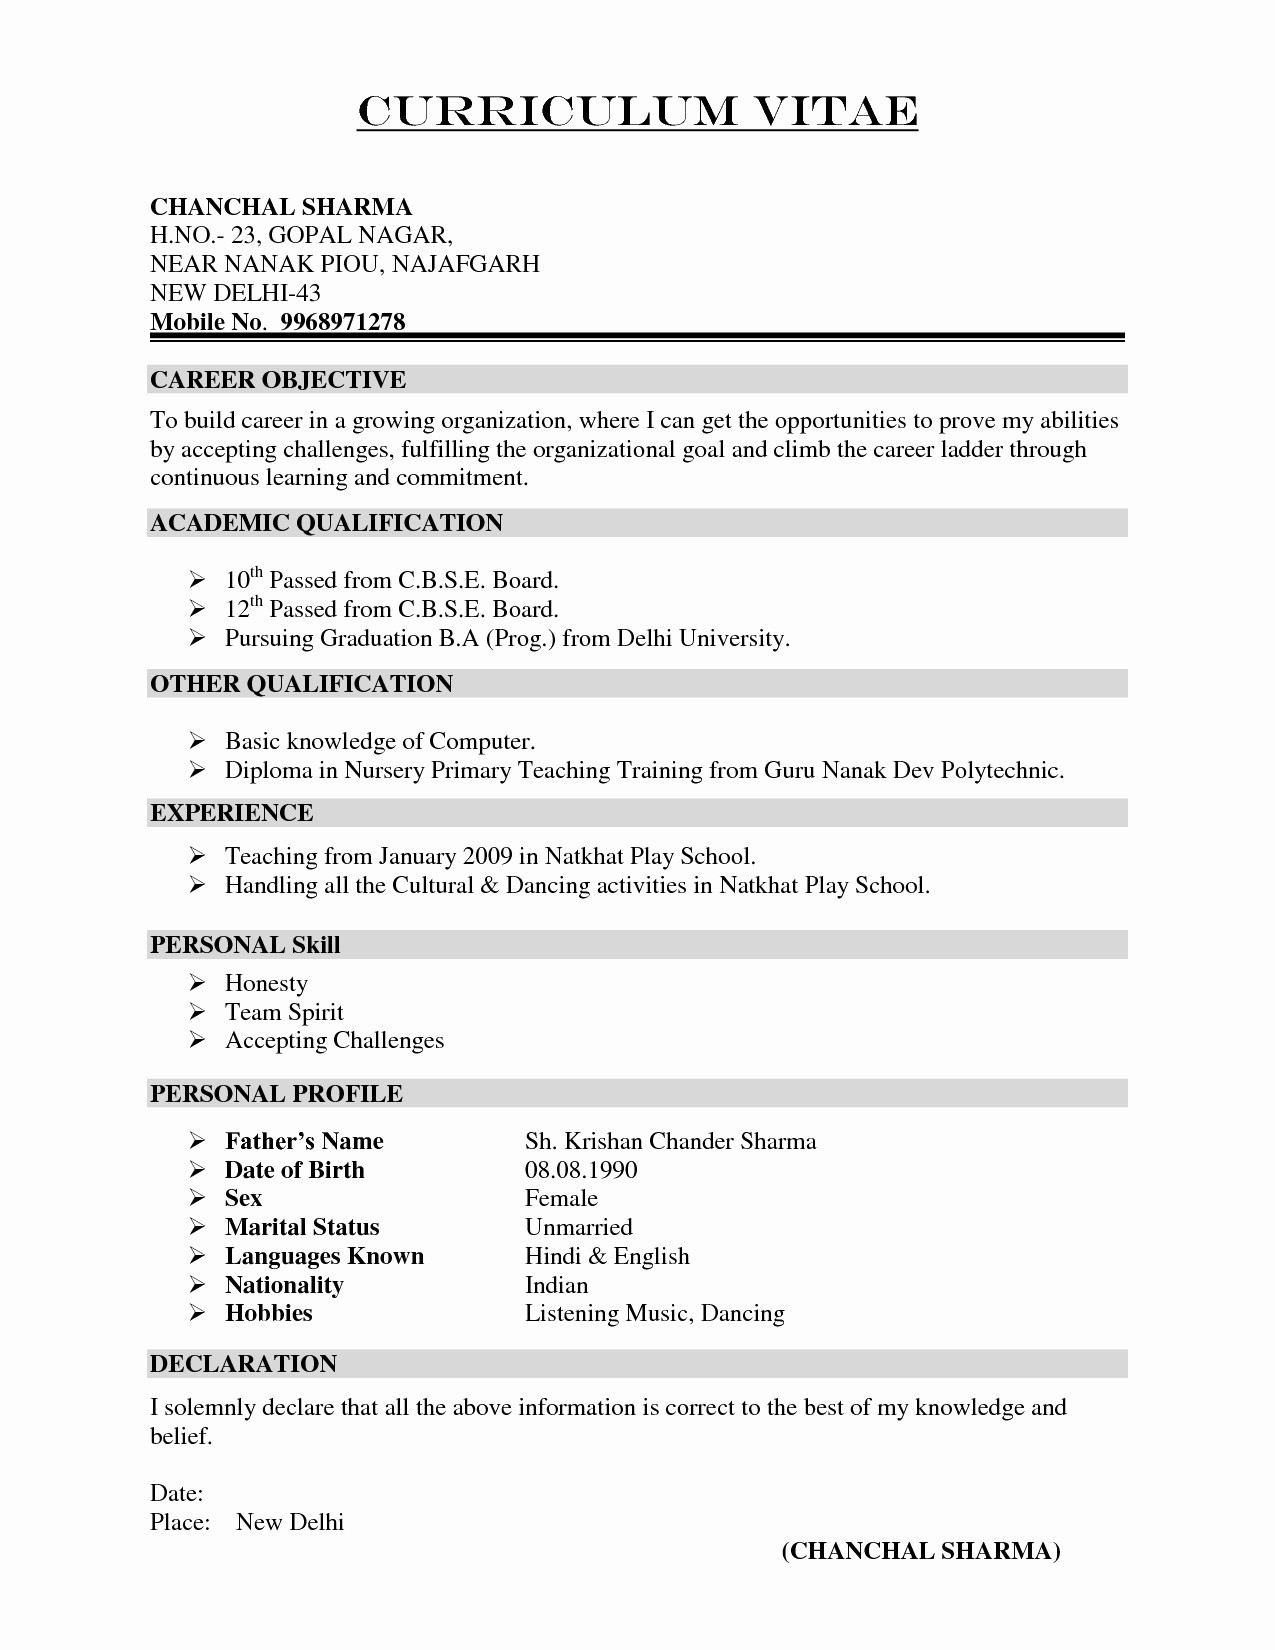 Job Letter Template - Resumes and Cover Letters Elegant New Resume Cover Letter formatted